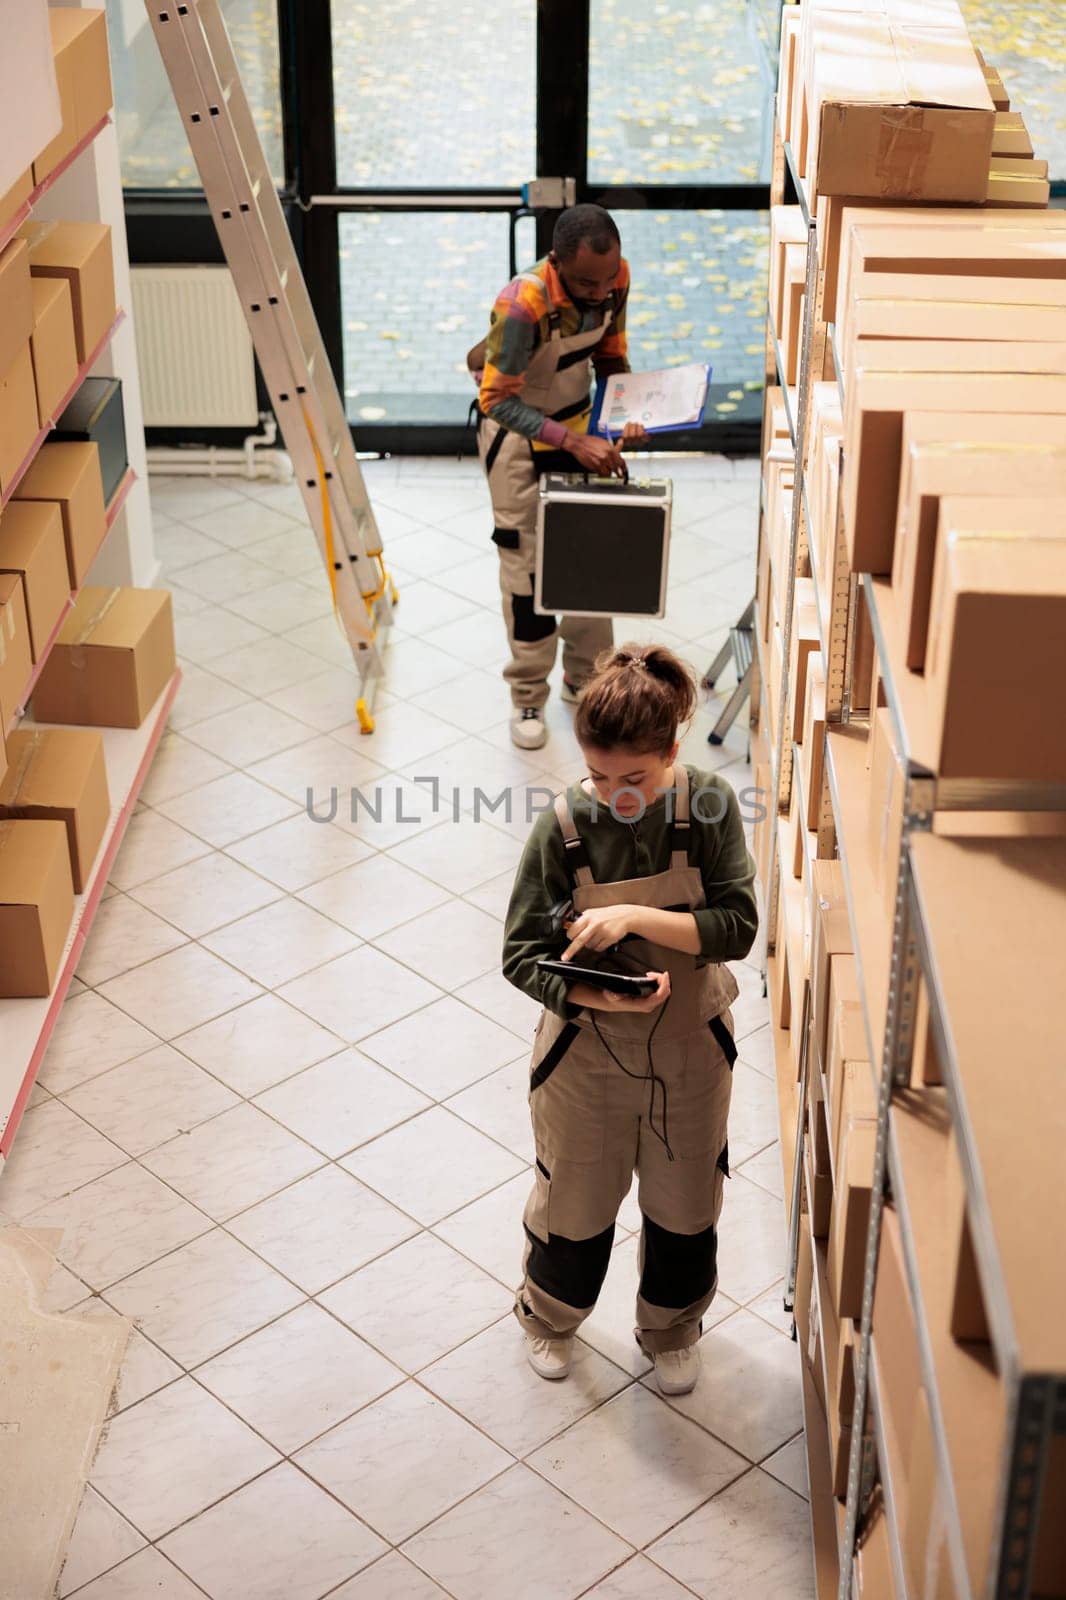 Warehouse employee analyzing products checklist on tablet by DCStudio